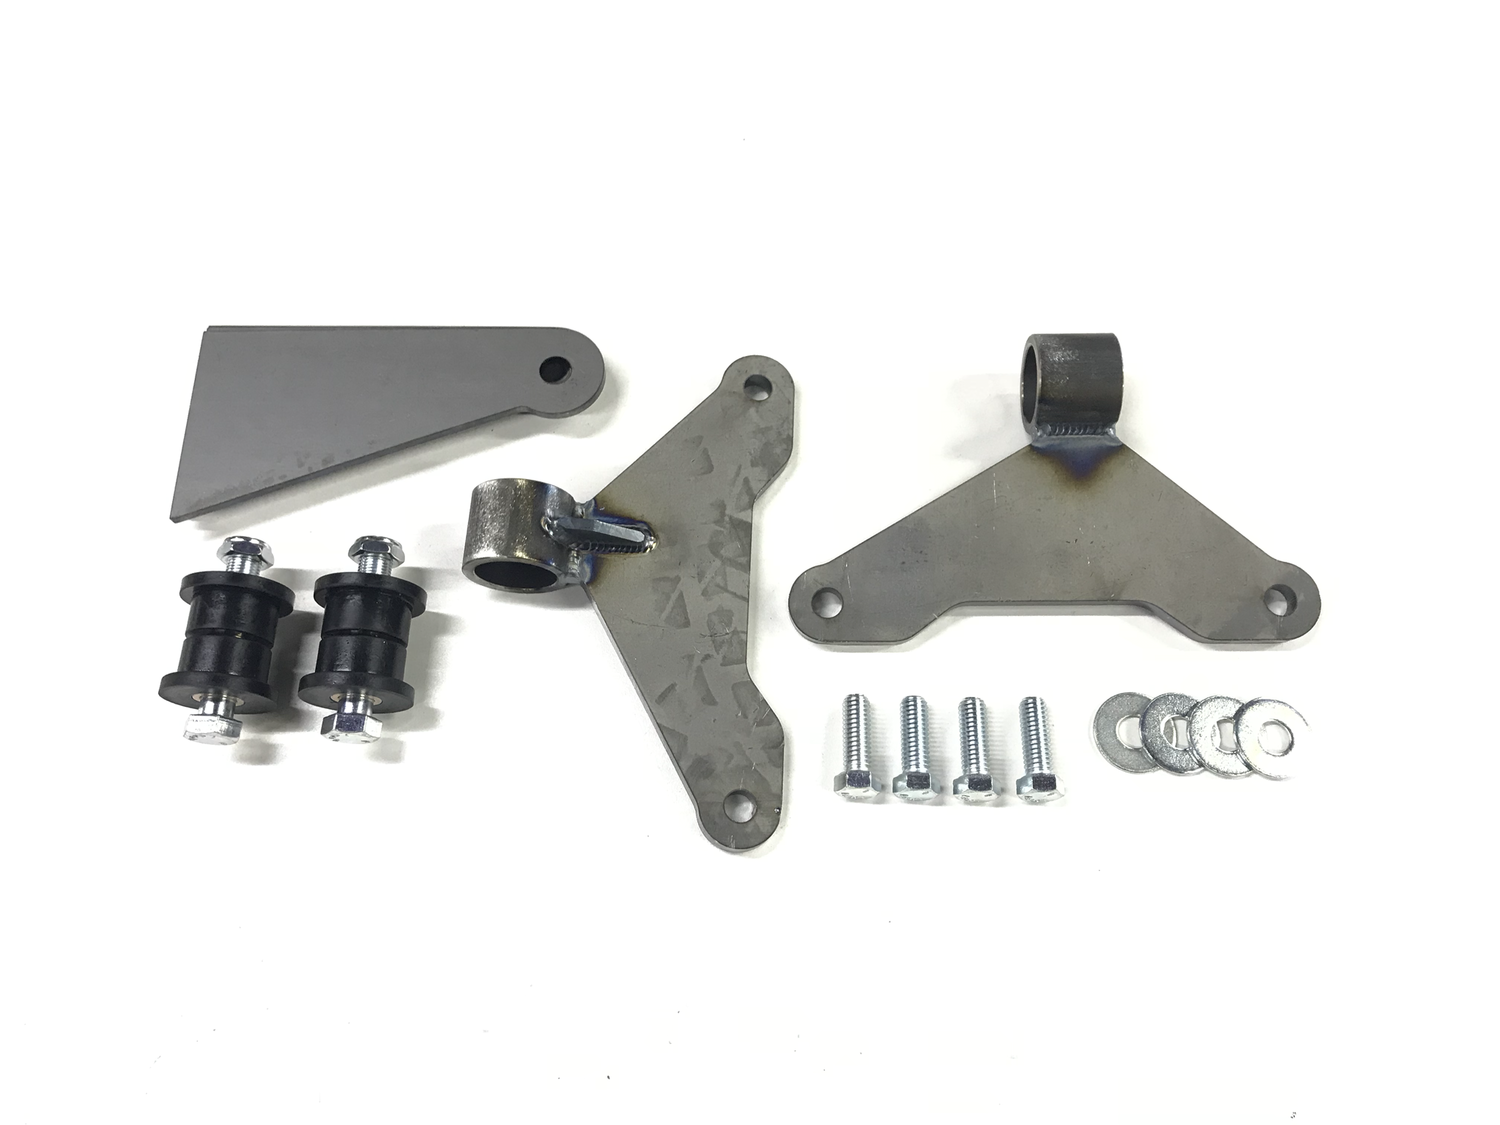 Ford Universal Motor Mount Kit for Small Block Engines 302 351 Cleveland A-Block 